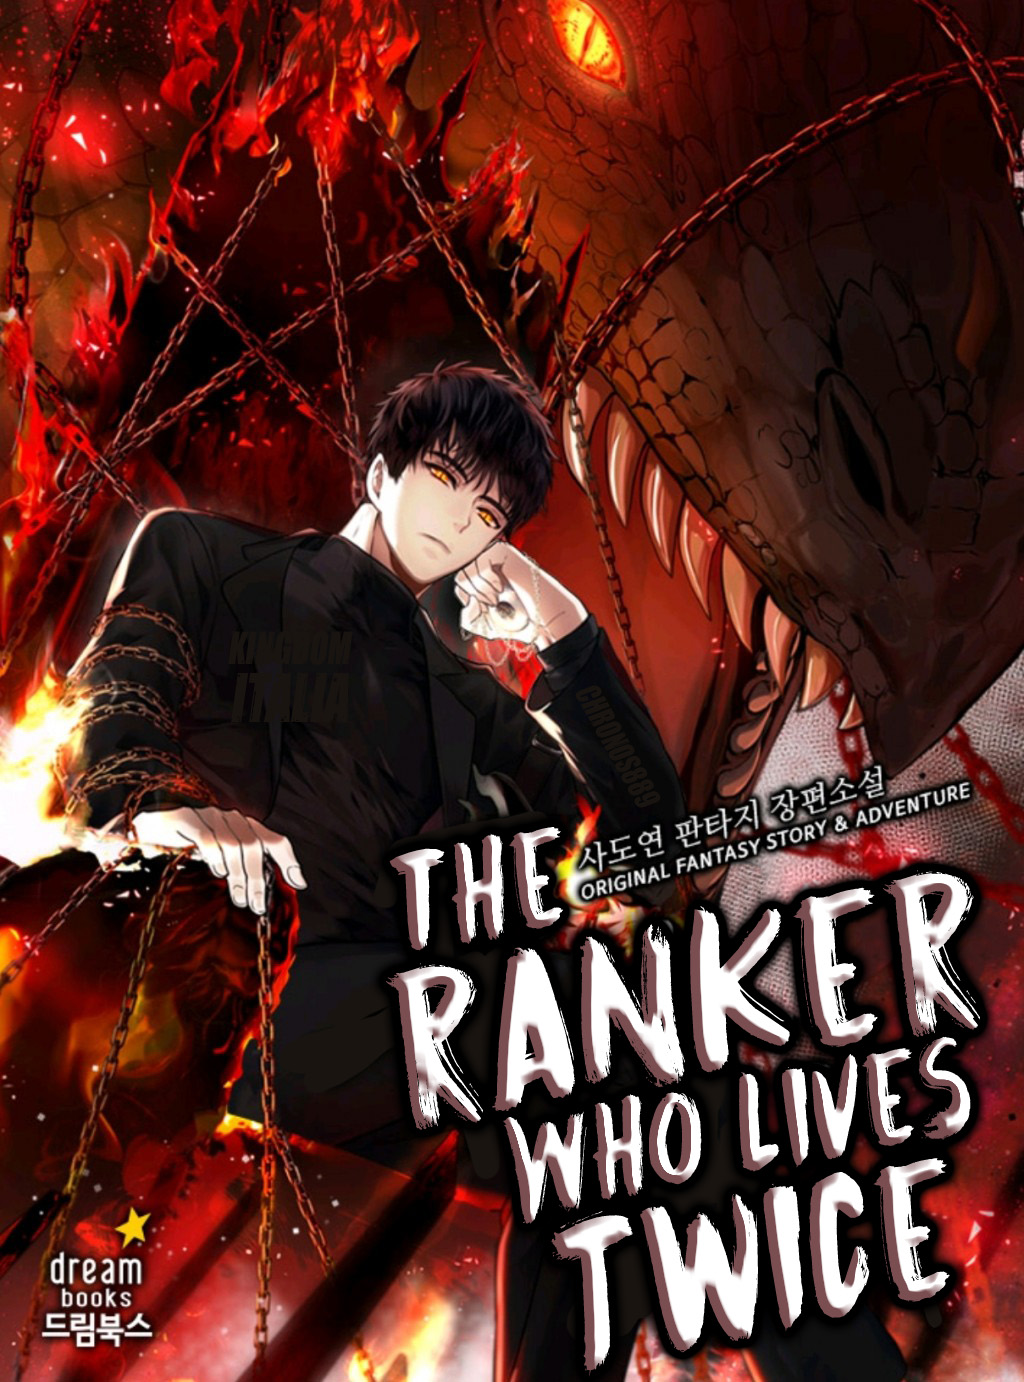 Ranker Who Lives A Second Time